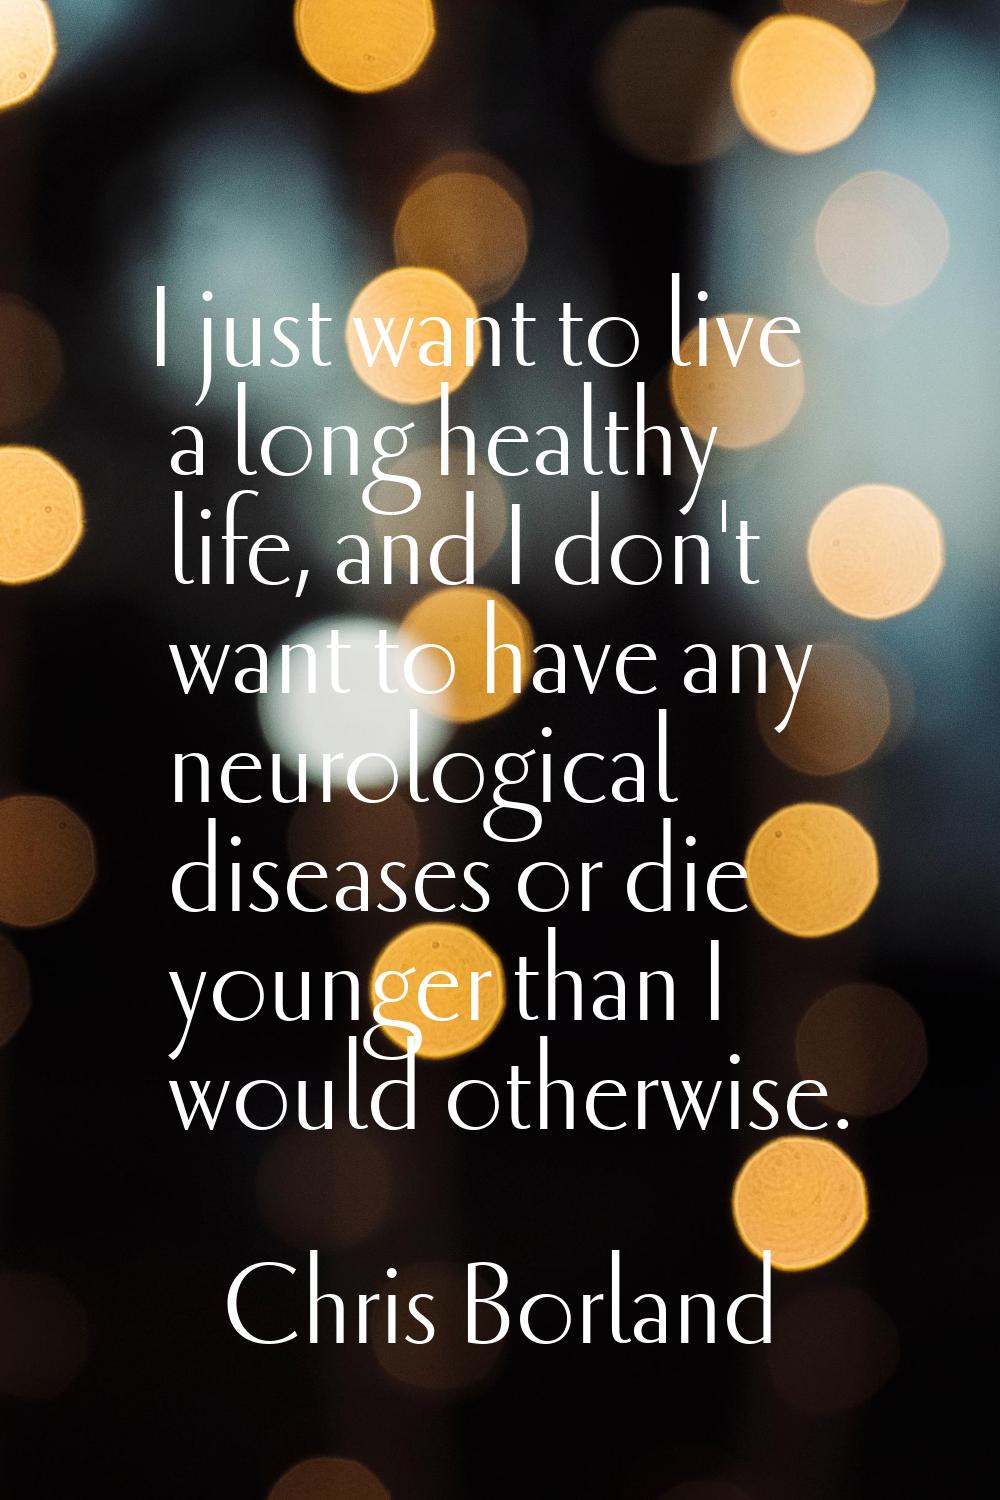 I just want to live a long healthy life, and I don't want to have any neurological diseases or die 